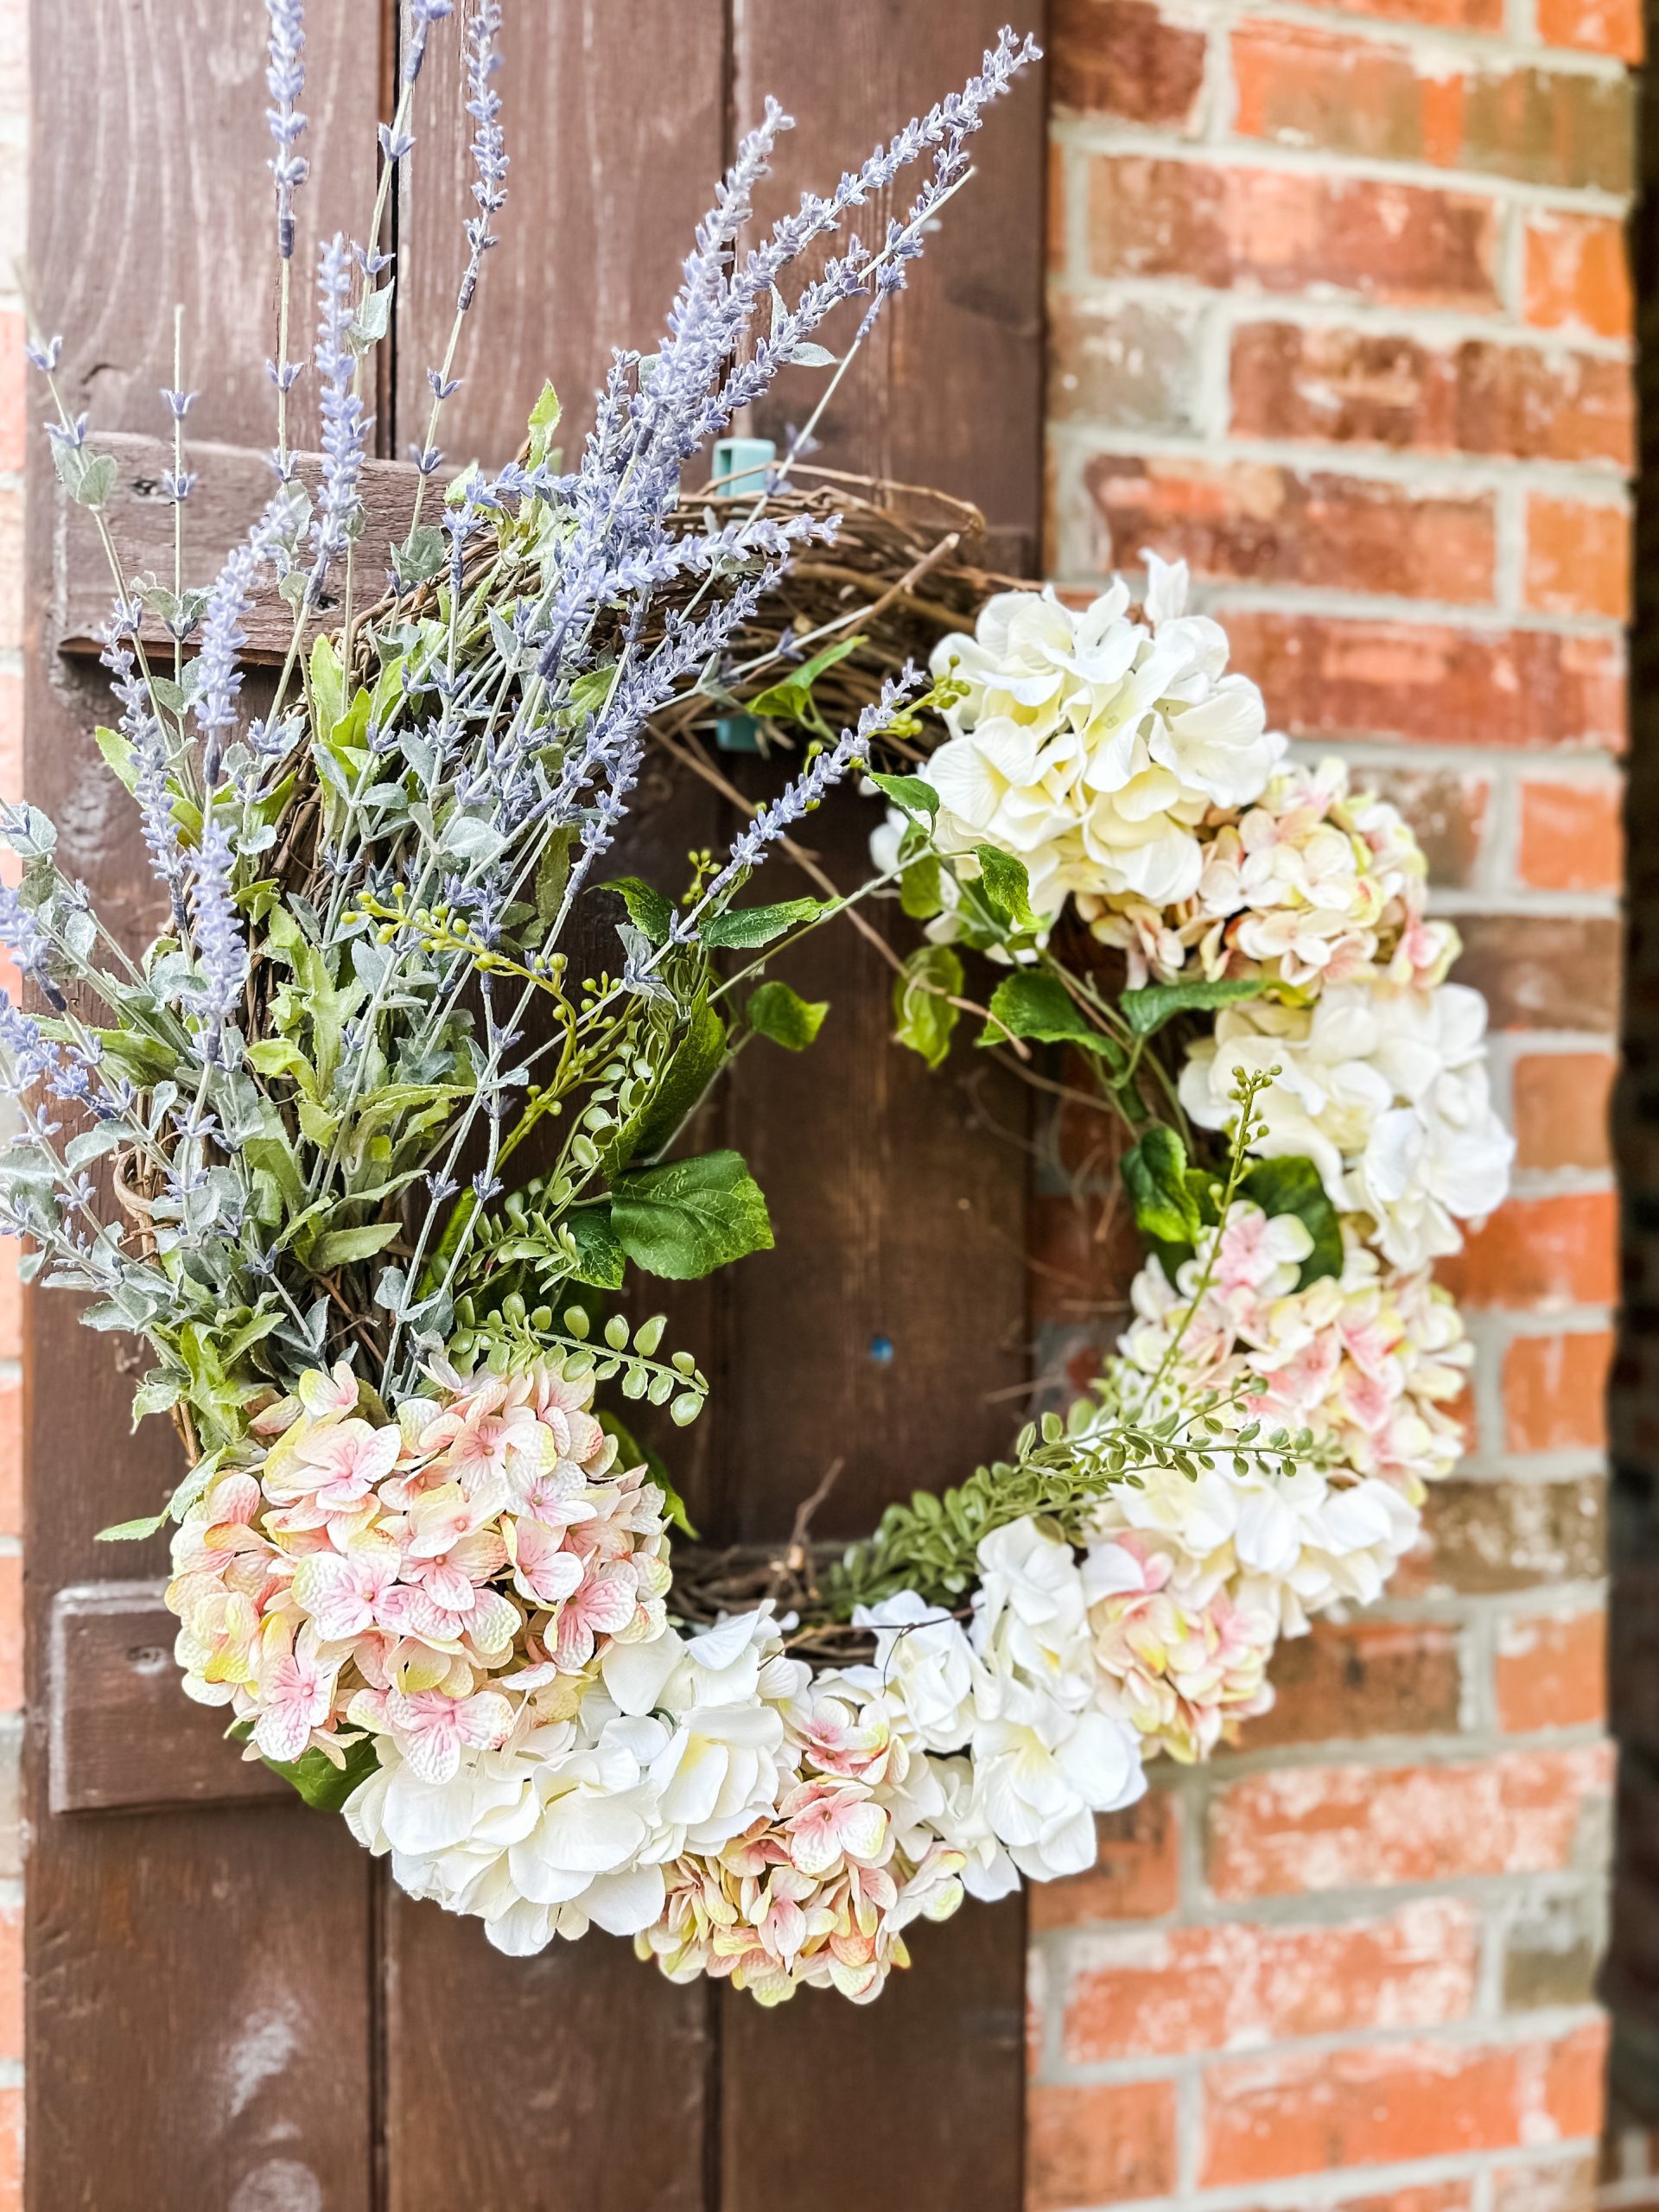 How to Make a Summer Wreath with Hydrangea and Lavender